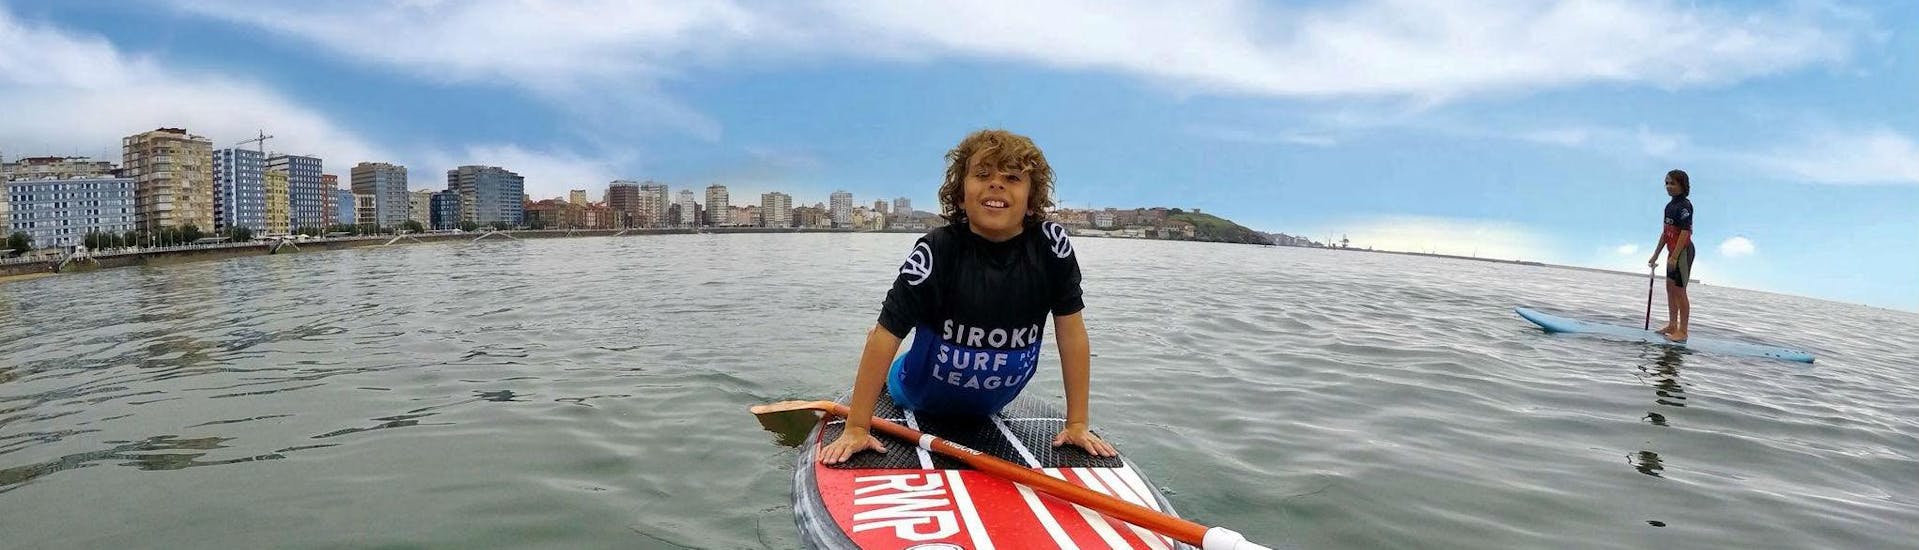 SUP Hire in Gijón.